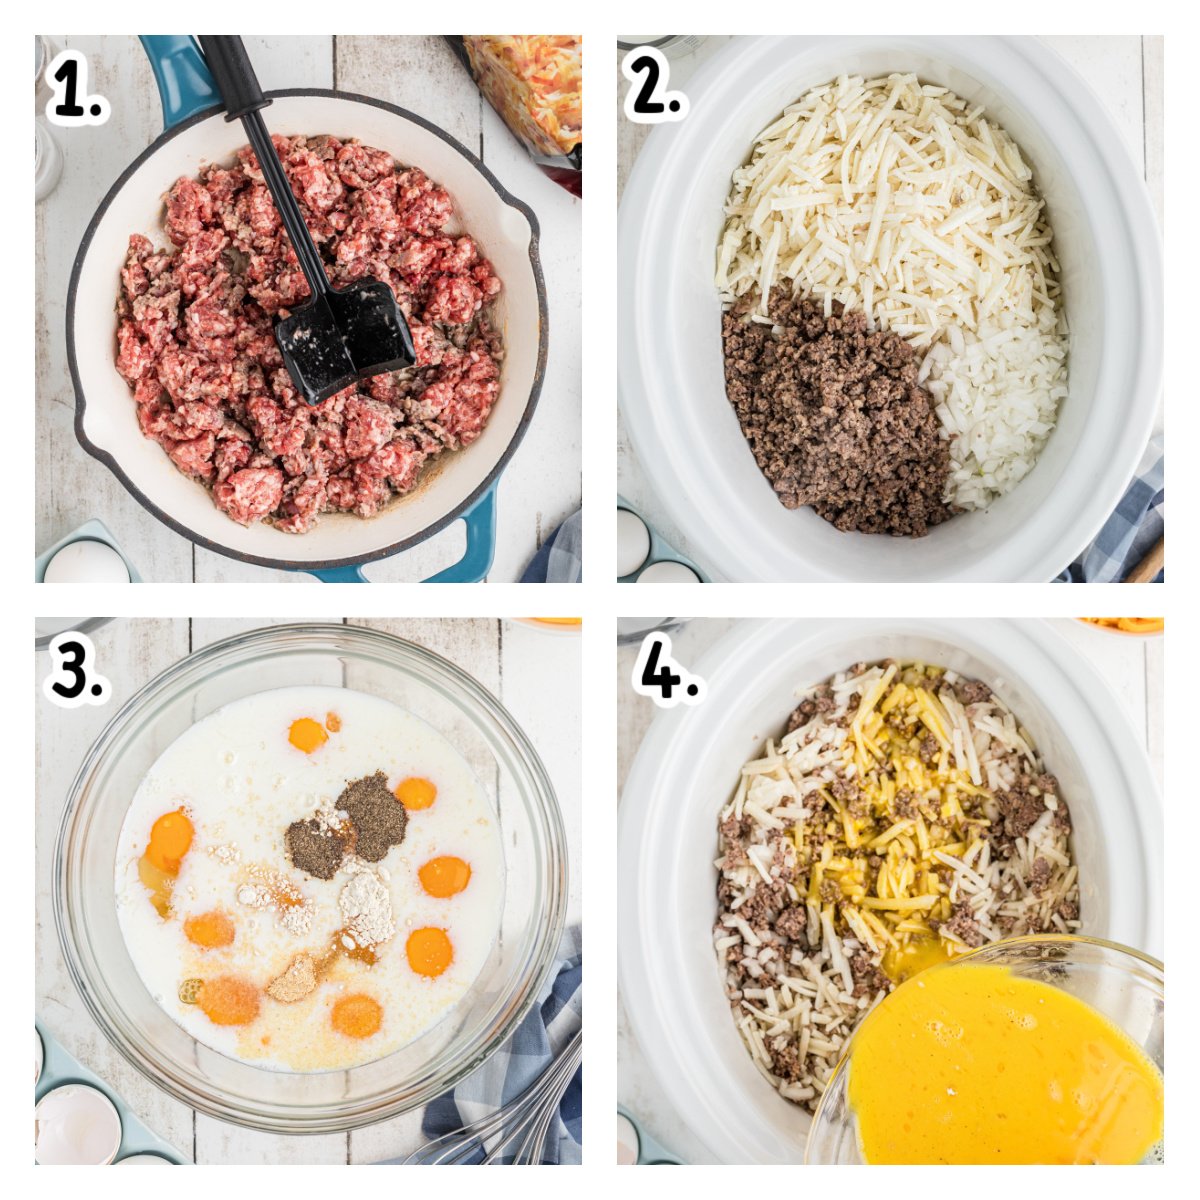 four images showing how to make slow cooker breakfast casserole.